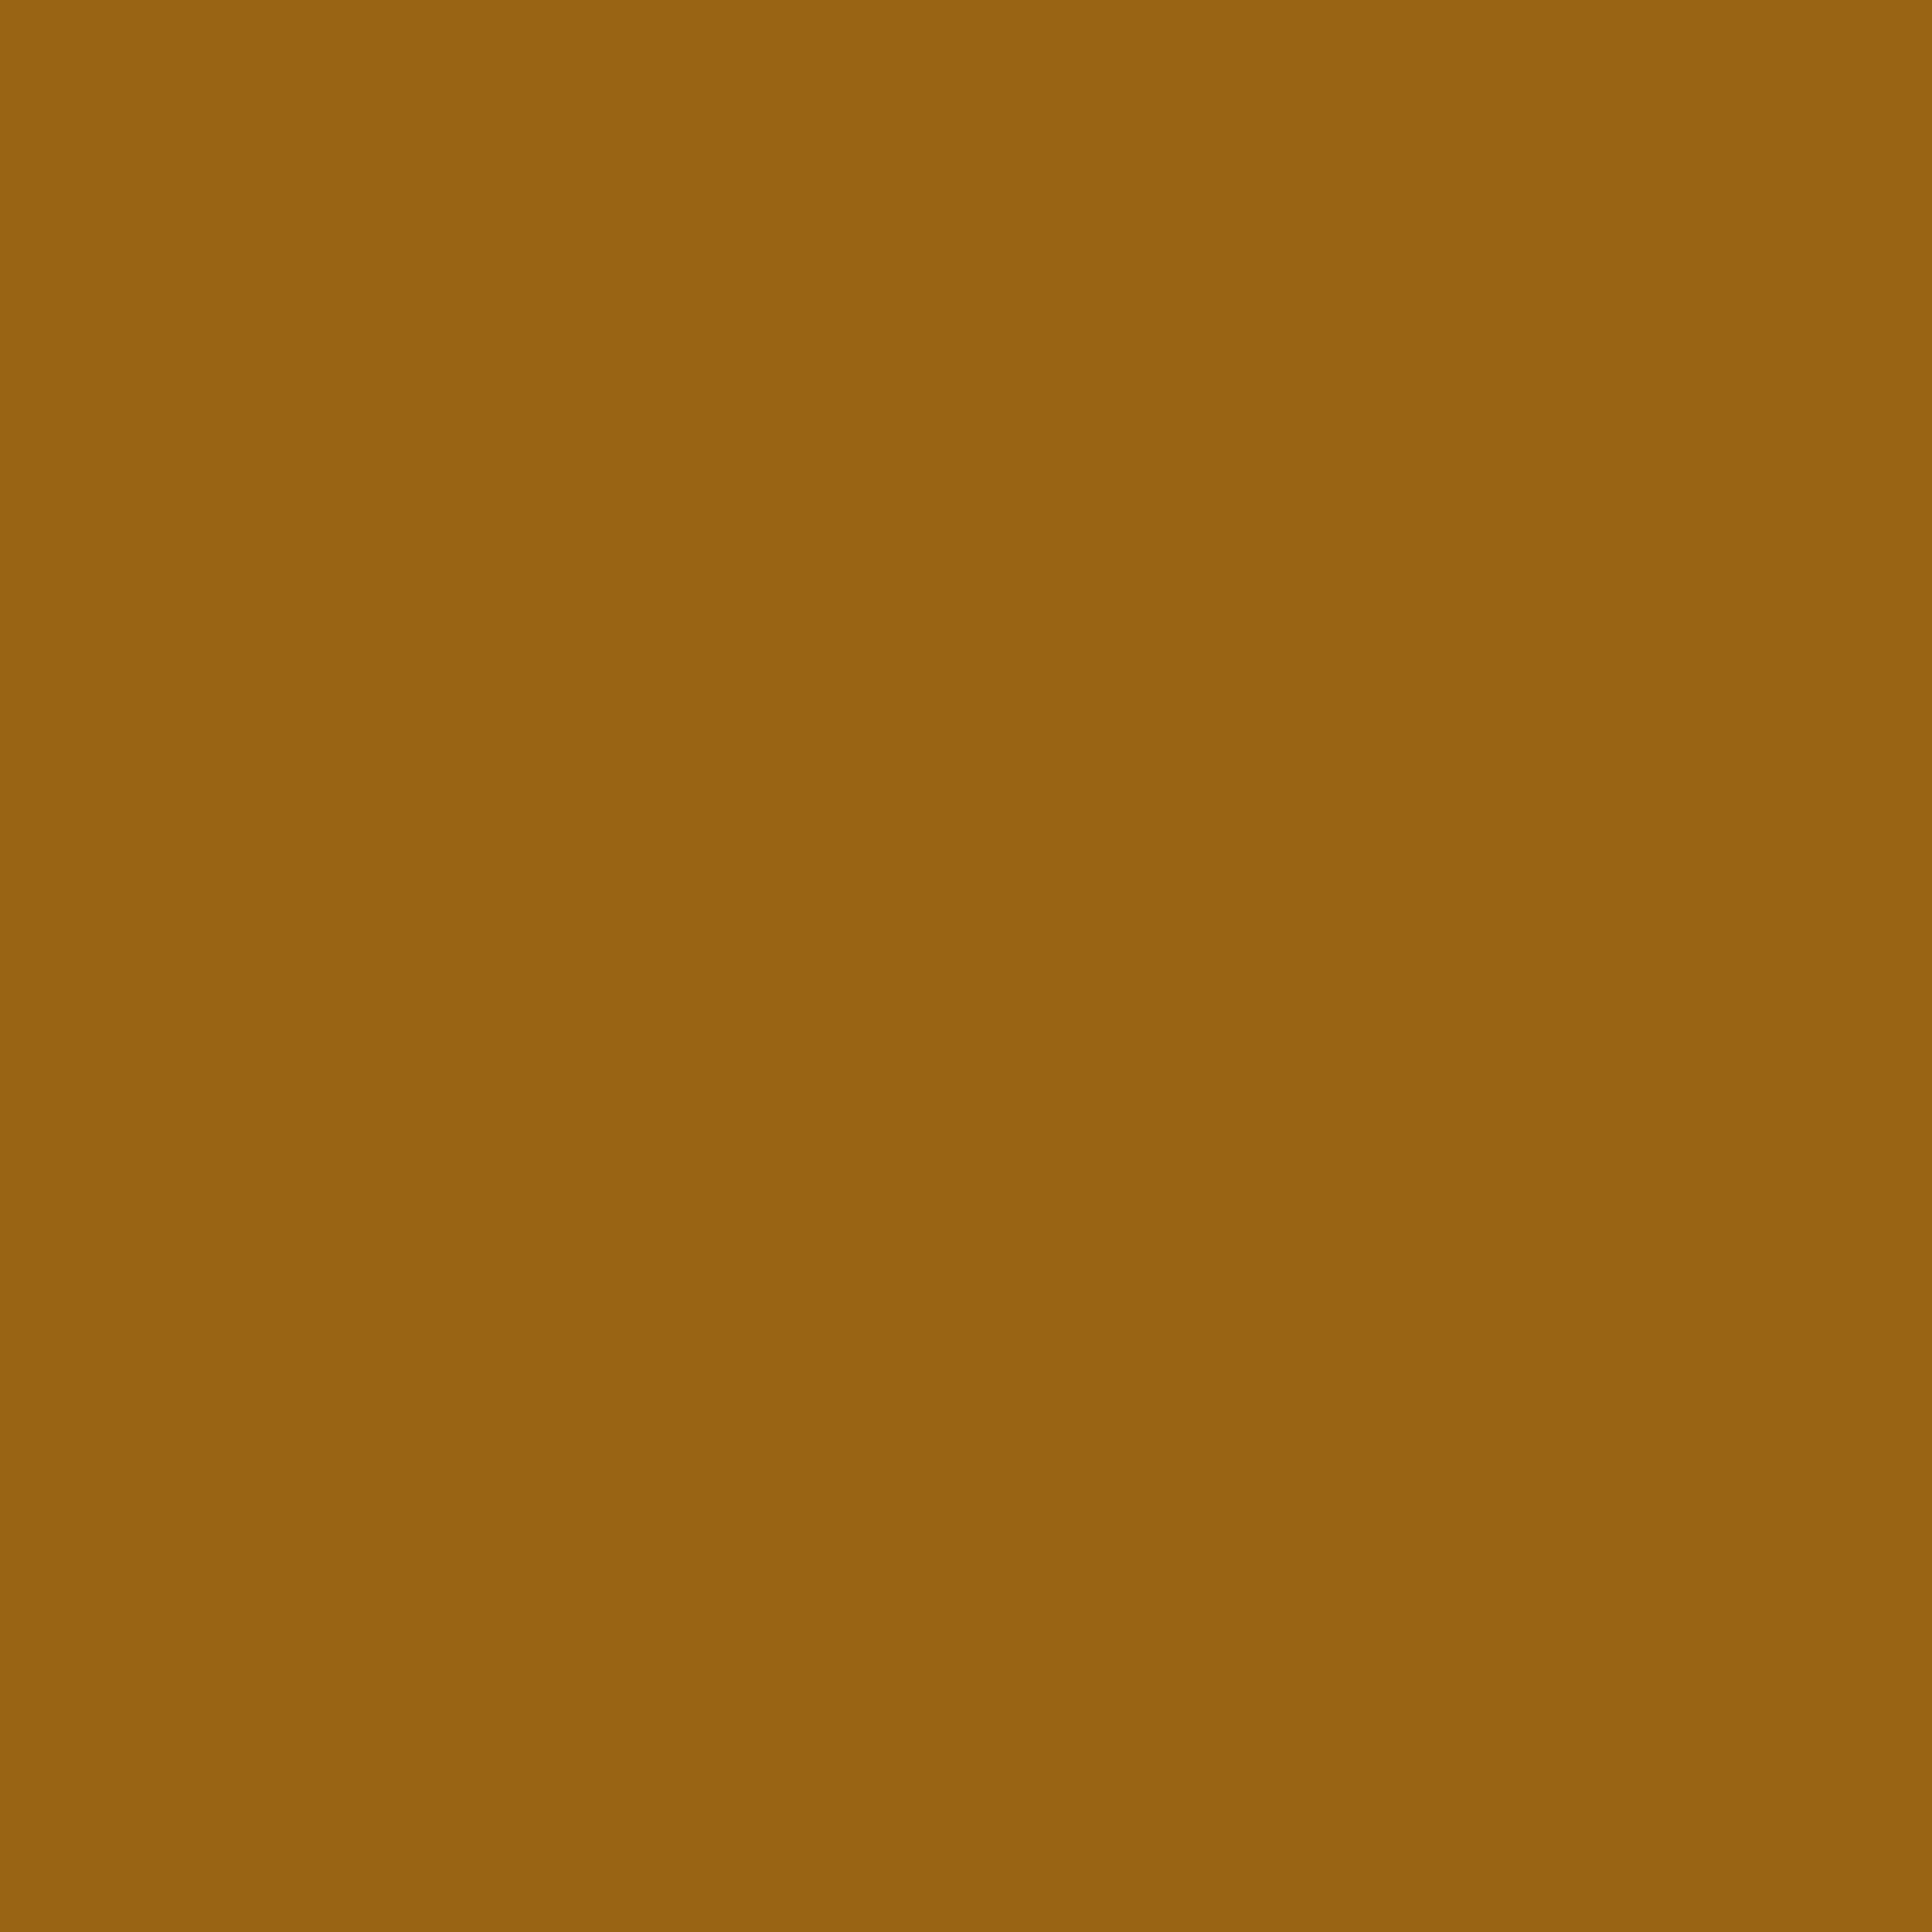 2732x2732 Golden Brown Solid Color Background